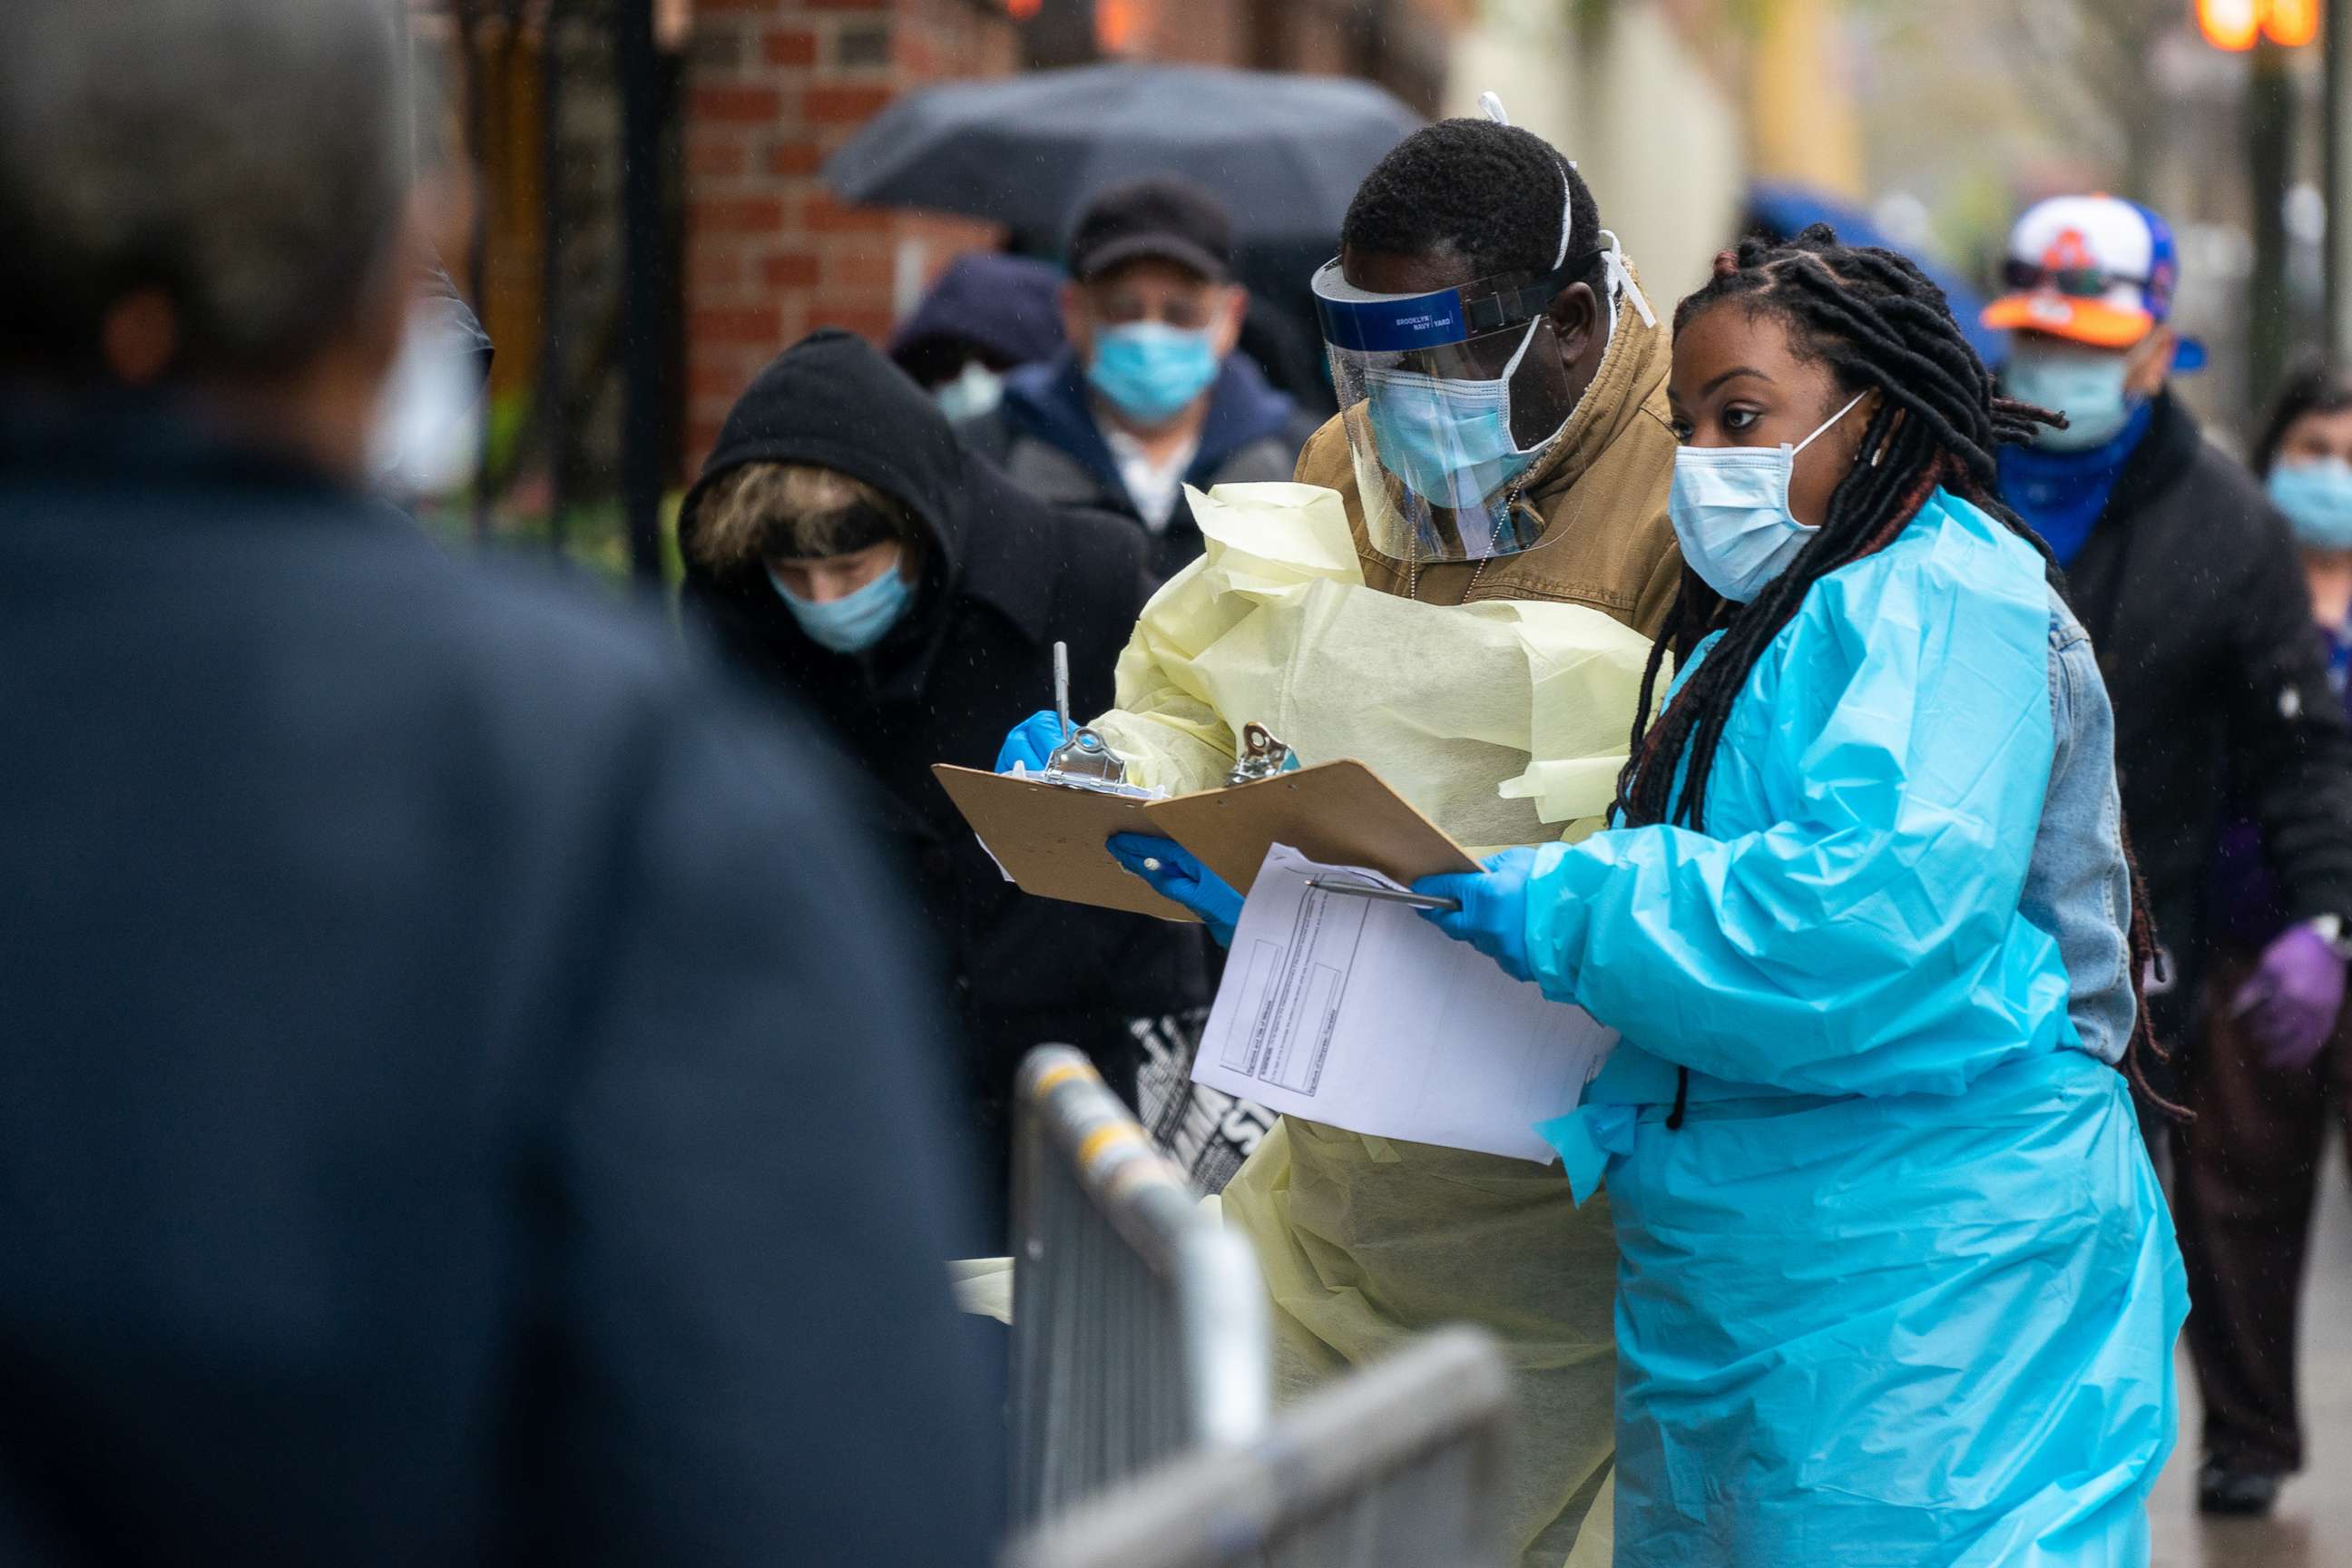 PHOTO: Medical workers assist people standing in line at NYC Health + Hospitals/Gotham Health, waiting to be tested for the coronavirus on April 24, 2020, in New York City.